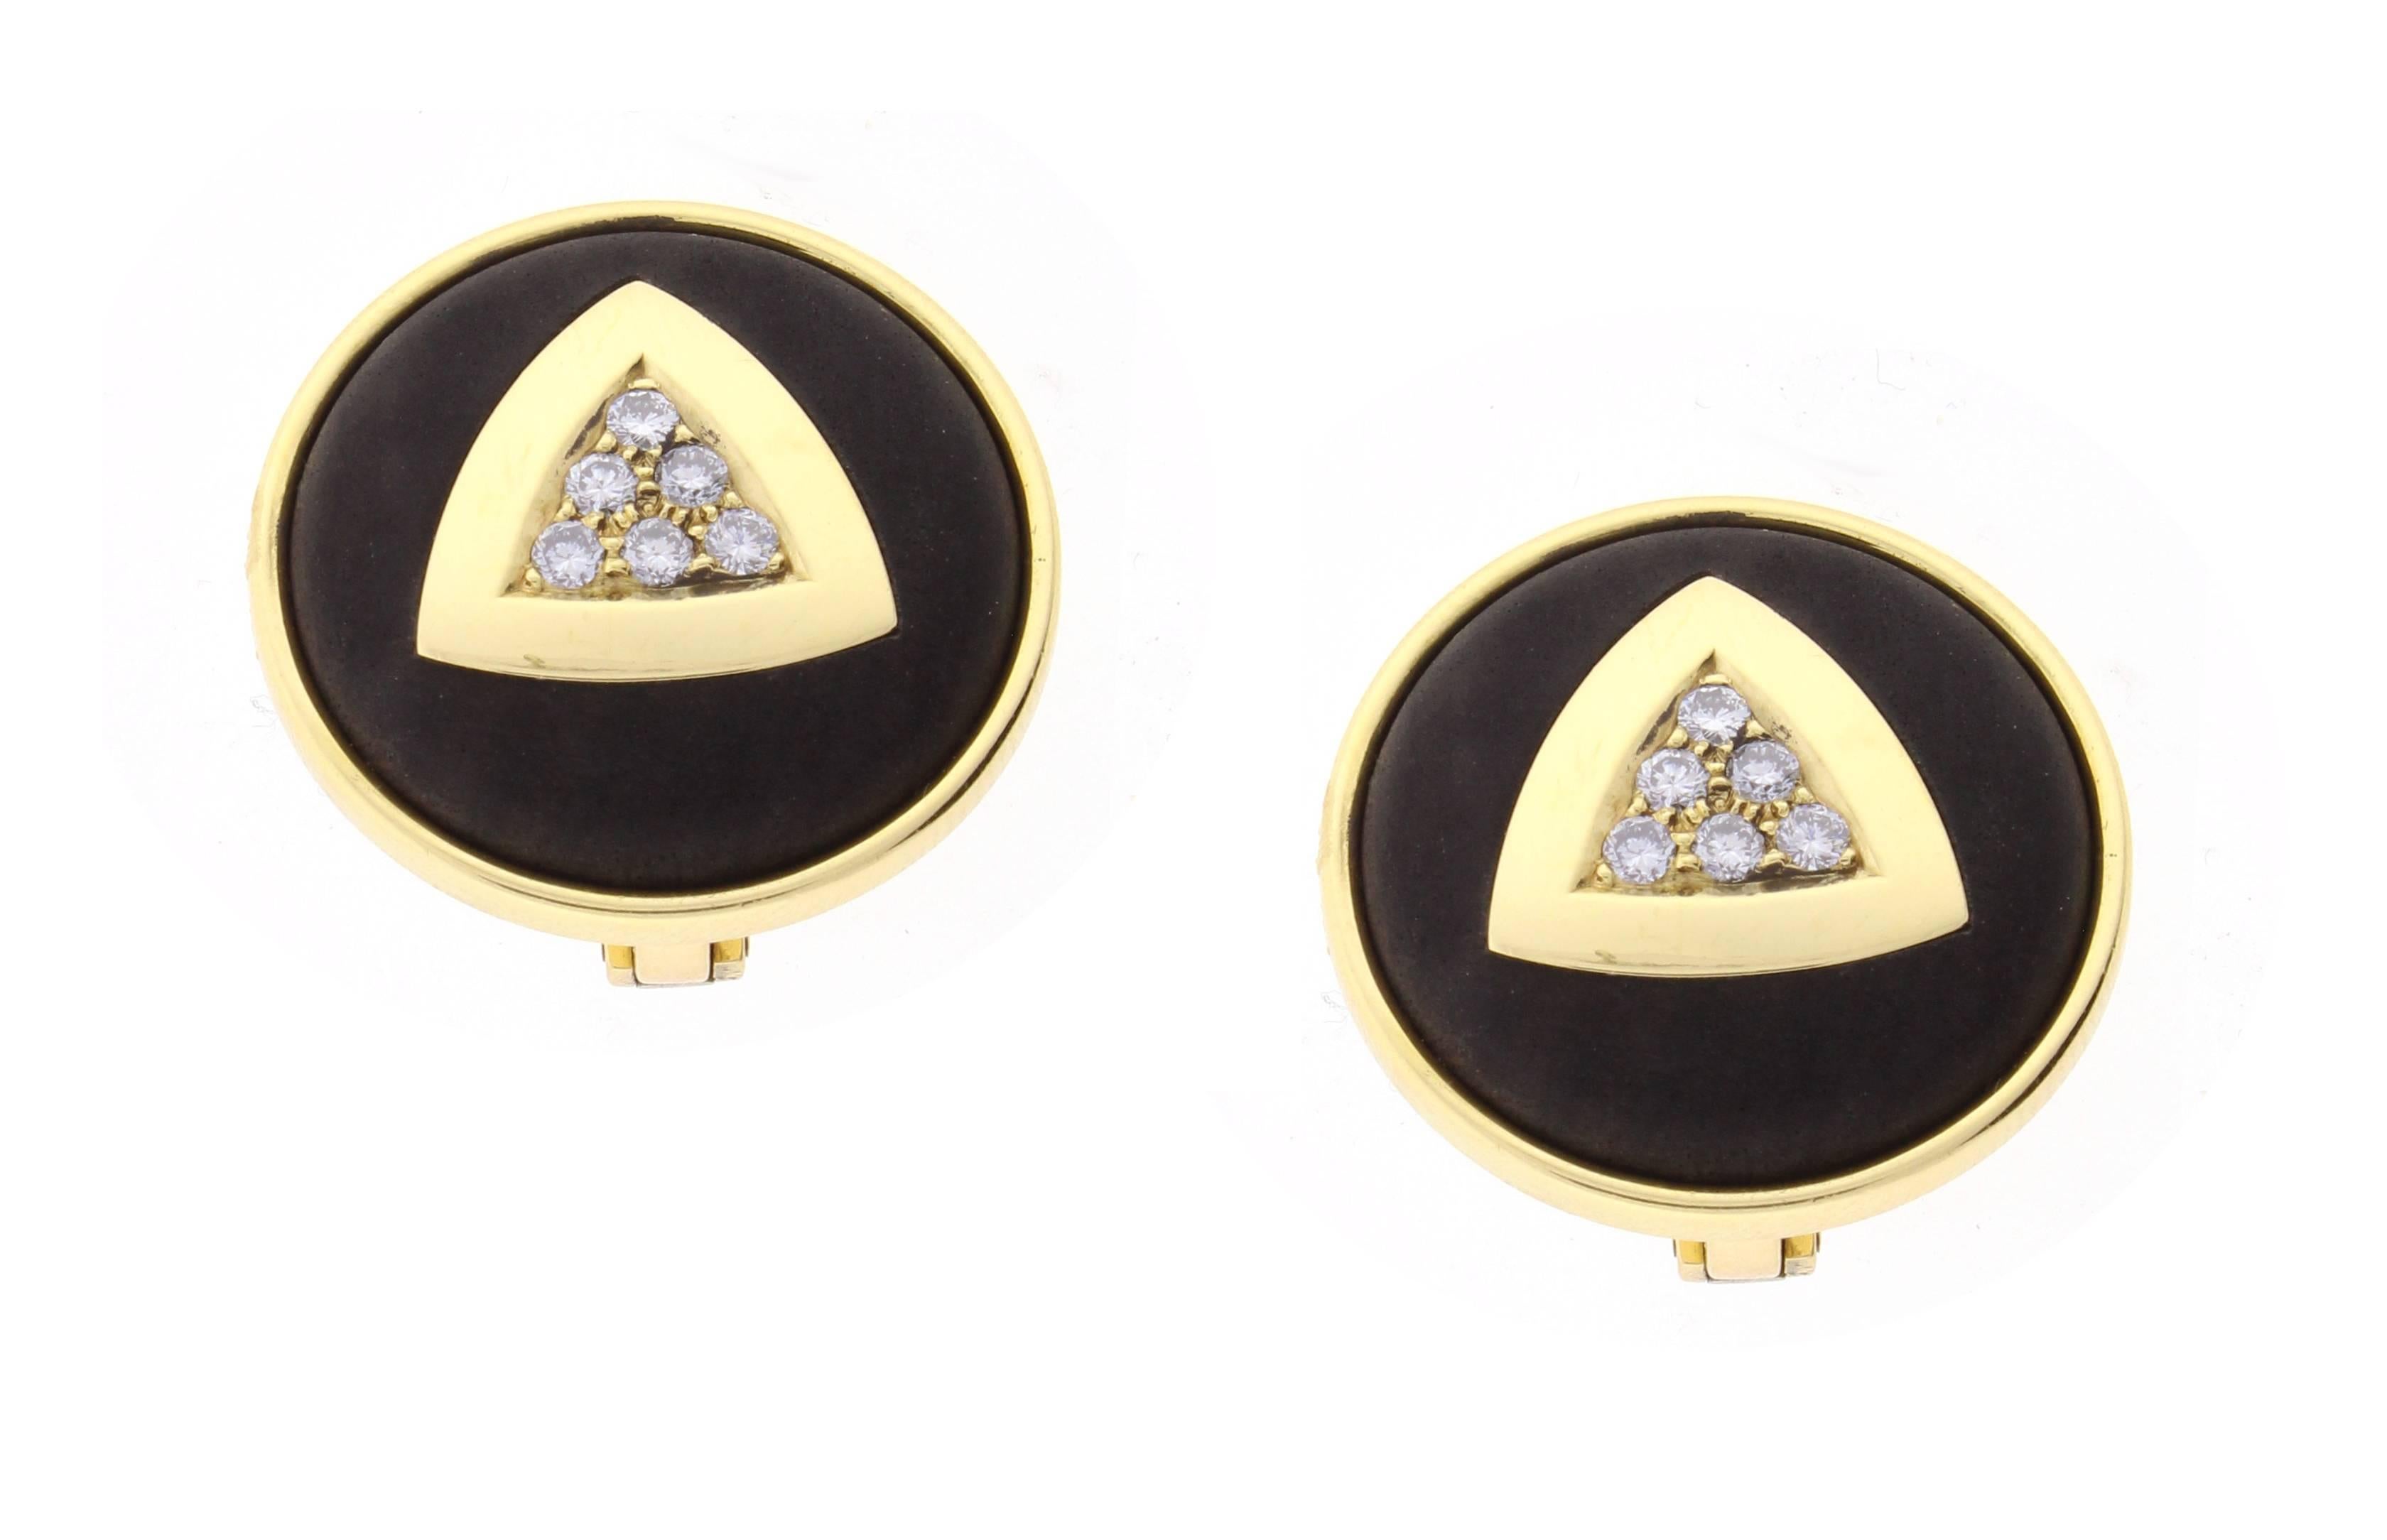 Leo De Vroomen is world renowned for his innovative and stunning designs. These lovely earrings feature a center triangle of diamonds inset in an ebony circle. The 18 karat gold earrings bear the official Assay Mark of London.  12 diamonds weigh